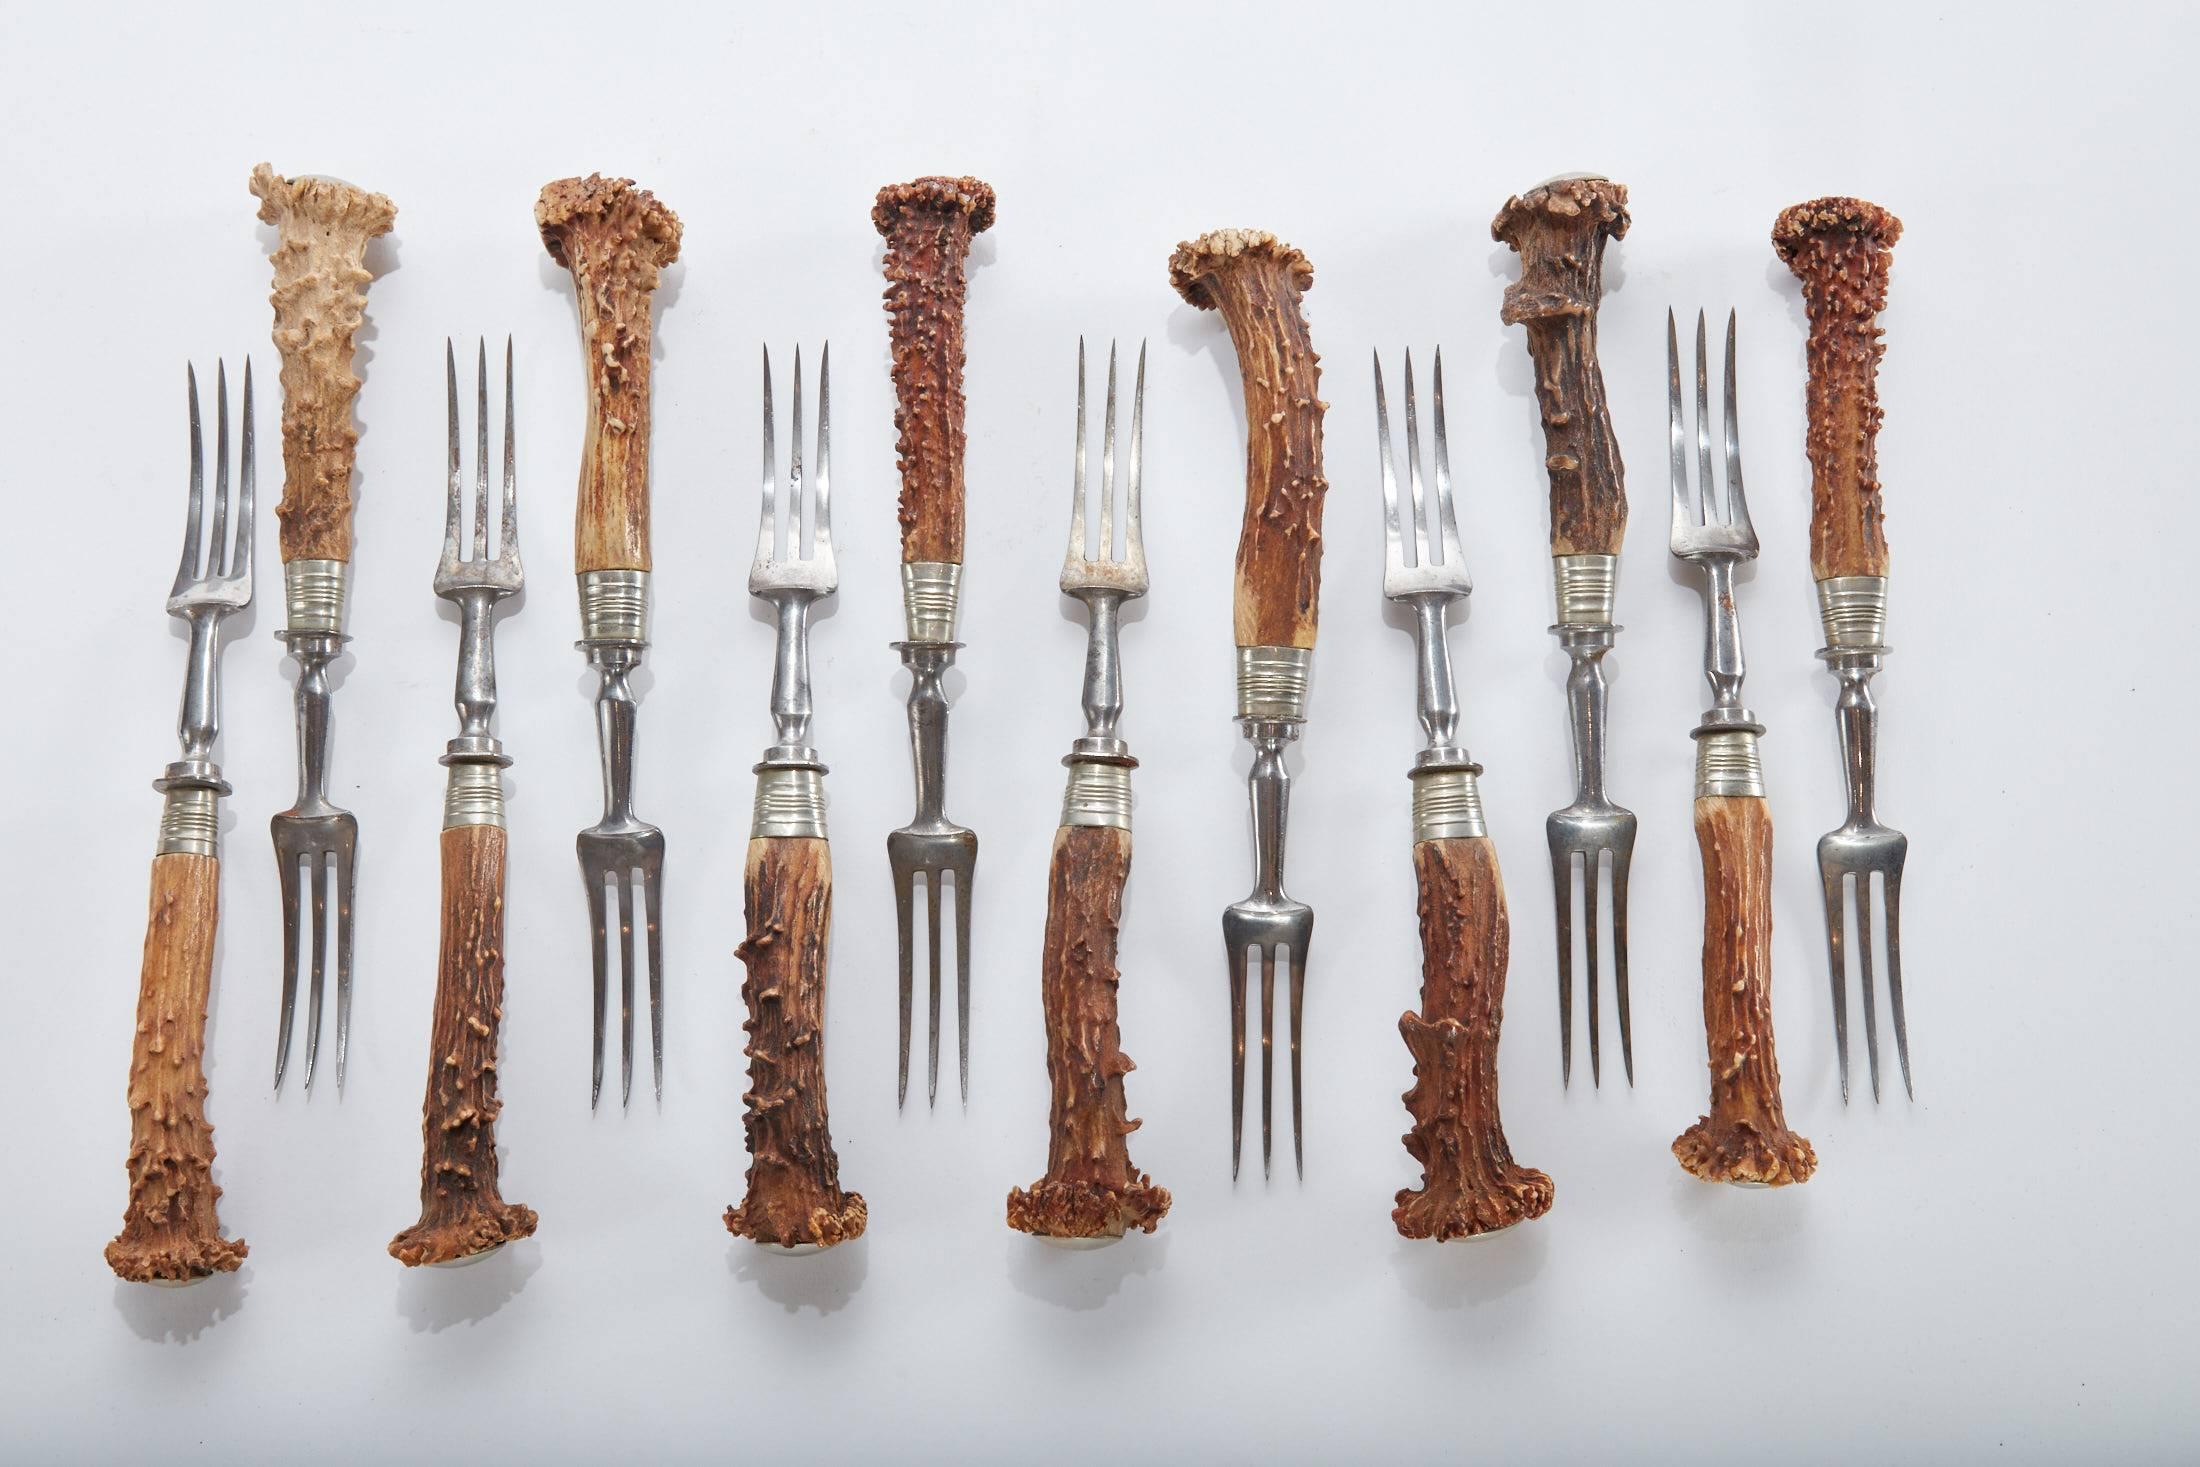 Late 18th century collection of antler flatware from a hunting lodge in Bavaria Handles are original as are times and blades set of 12 large fork/knives

Average size / various sizes due to uniqueness:
Fork 8.50